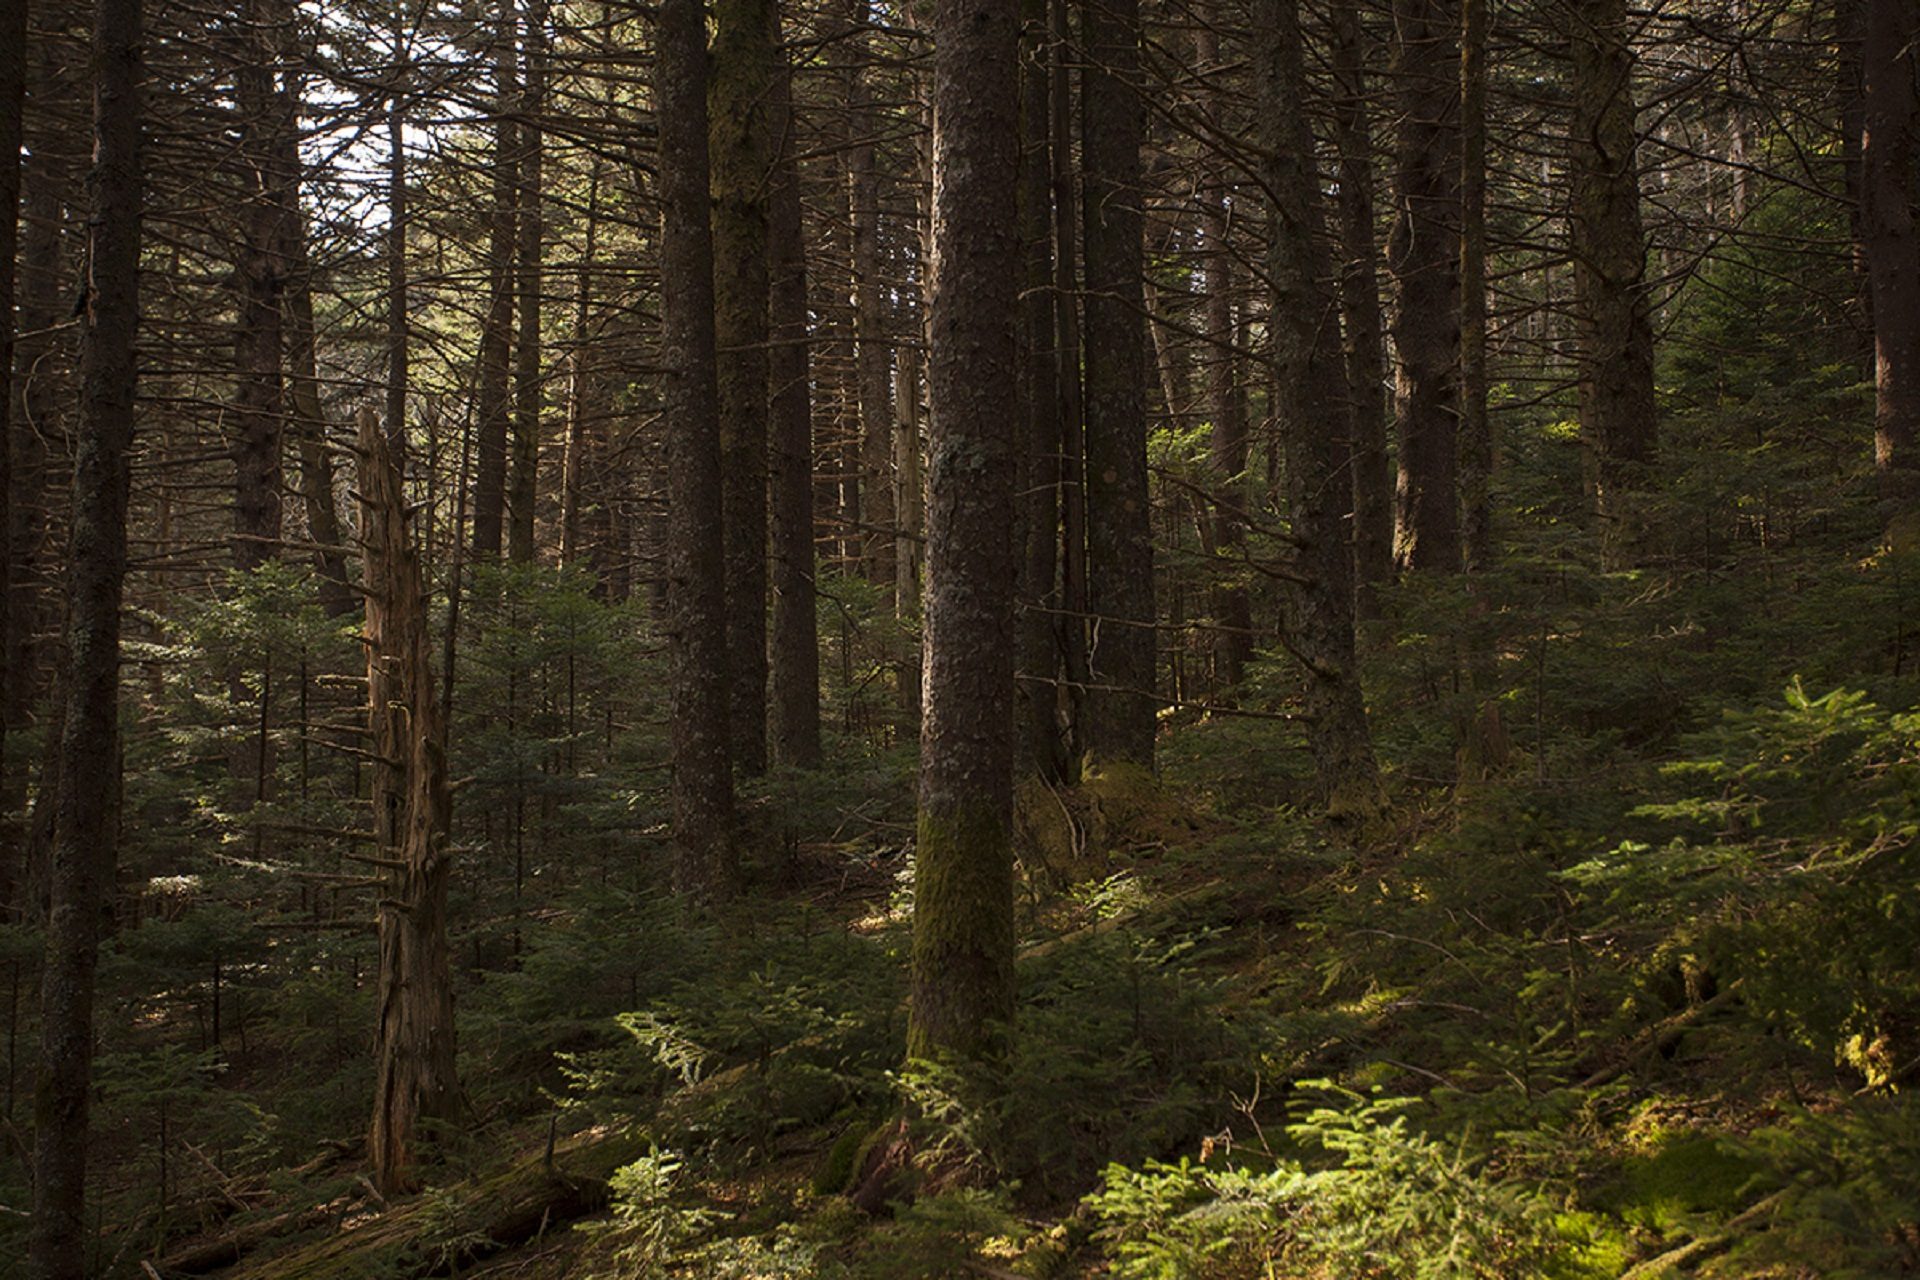 A spruce-fir forest on Roan Mountain, in Tennessee. The Fraser firs grow on just seven mountain peaks in the Southern Appalachians and are considered an endangered ecosystem.